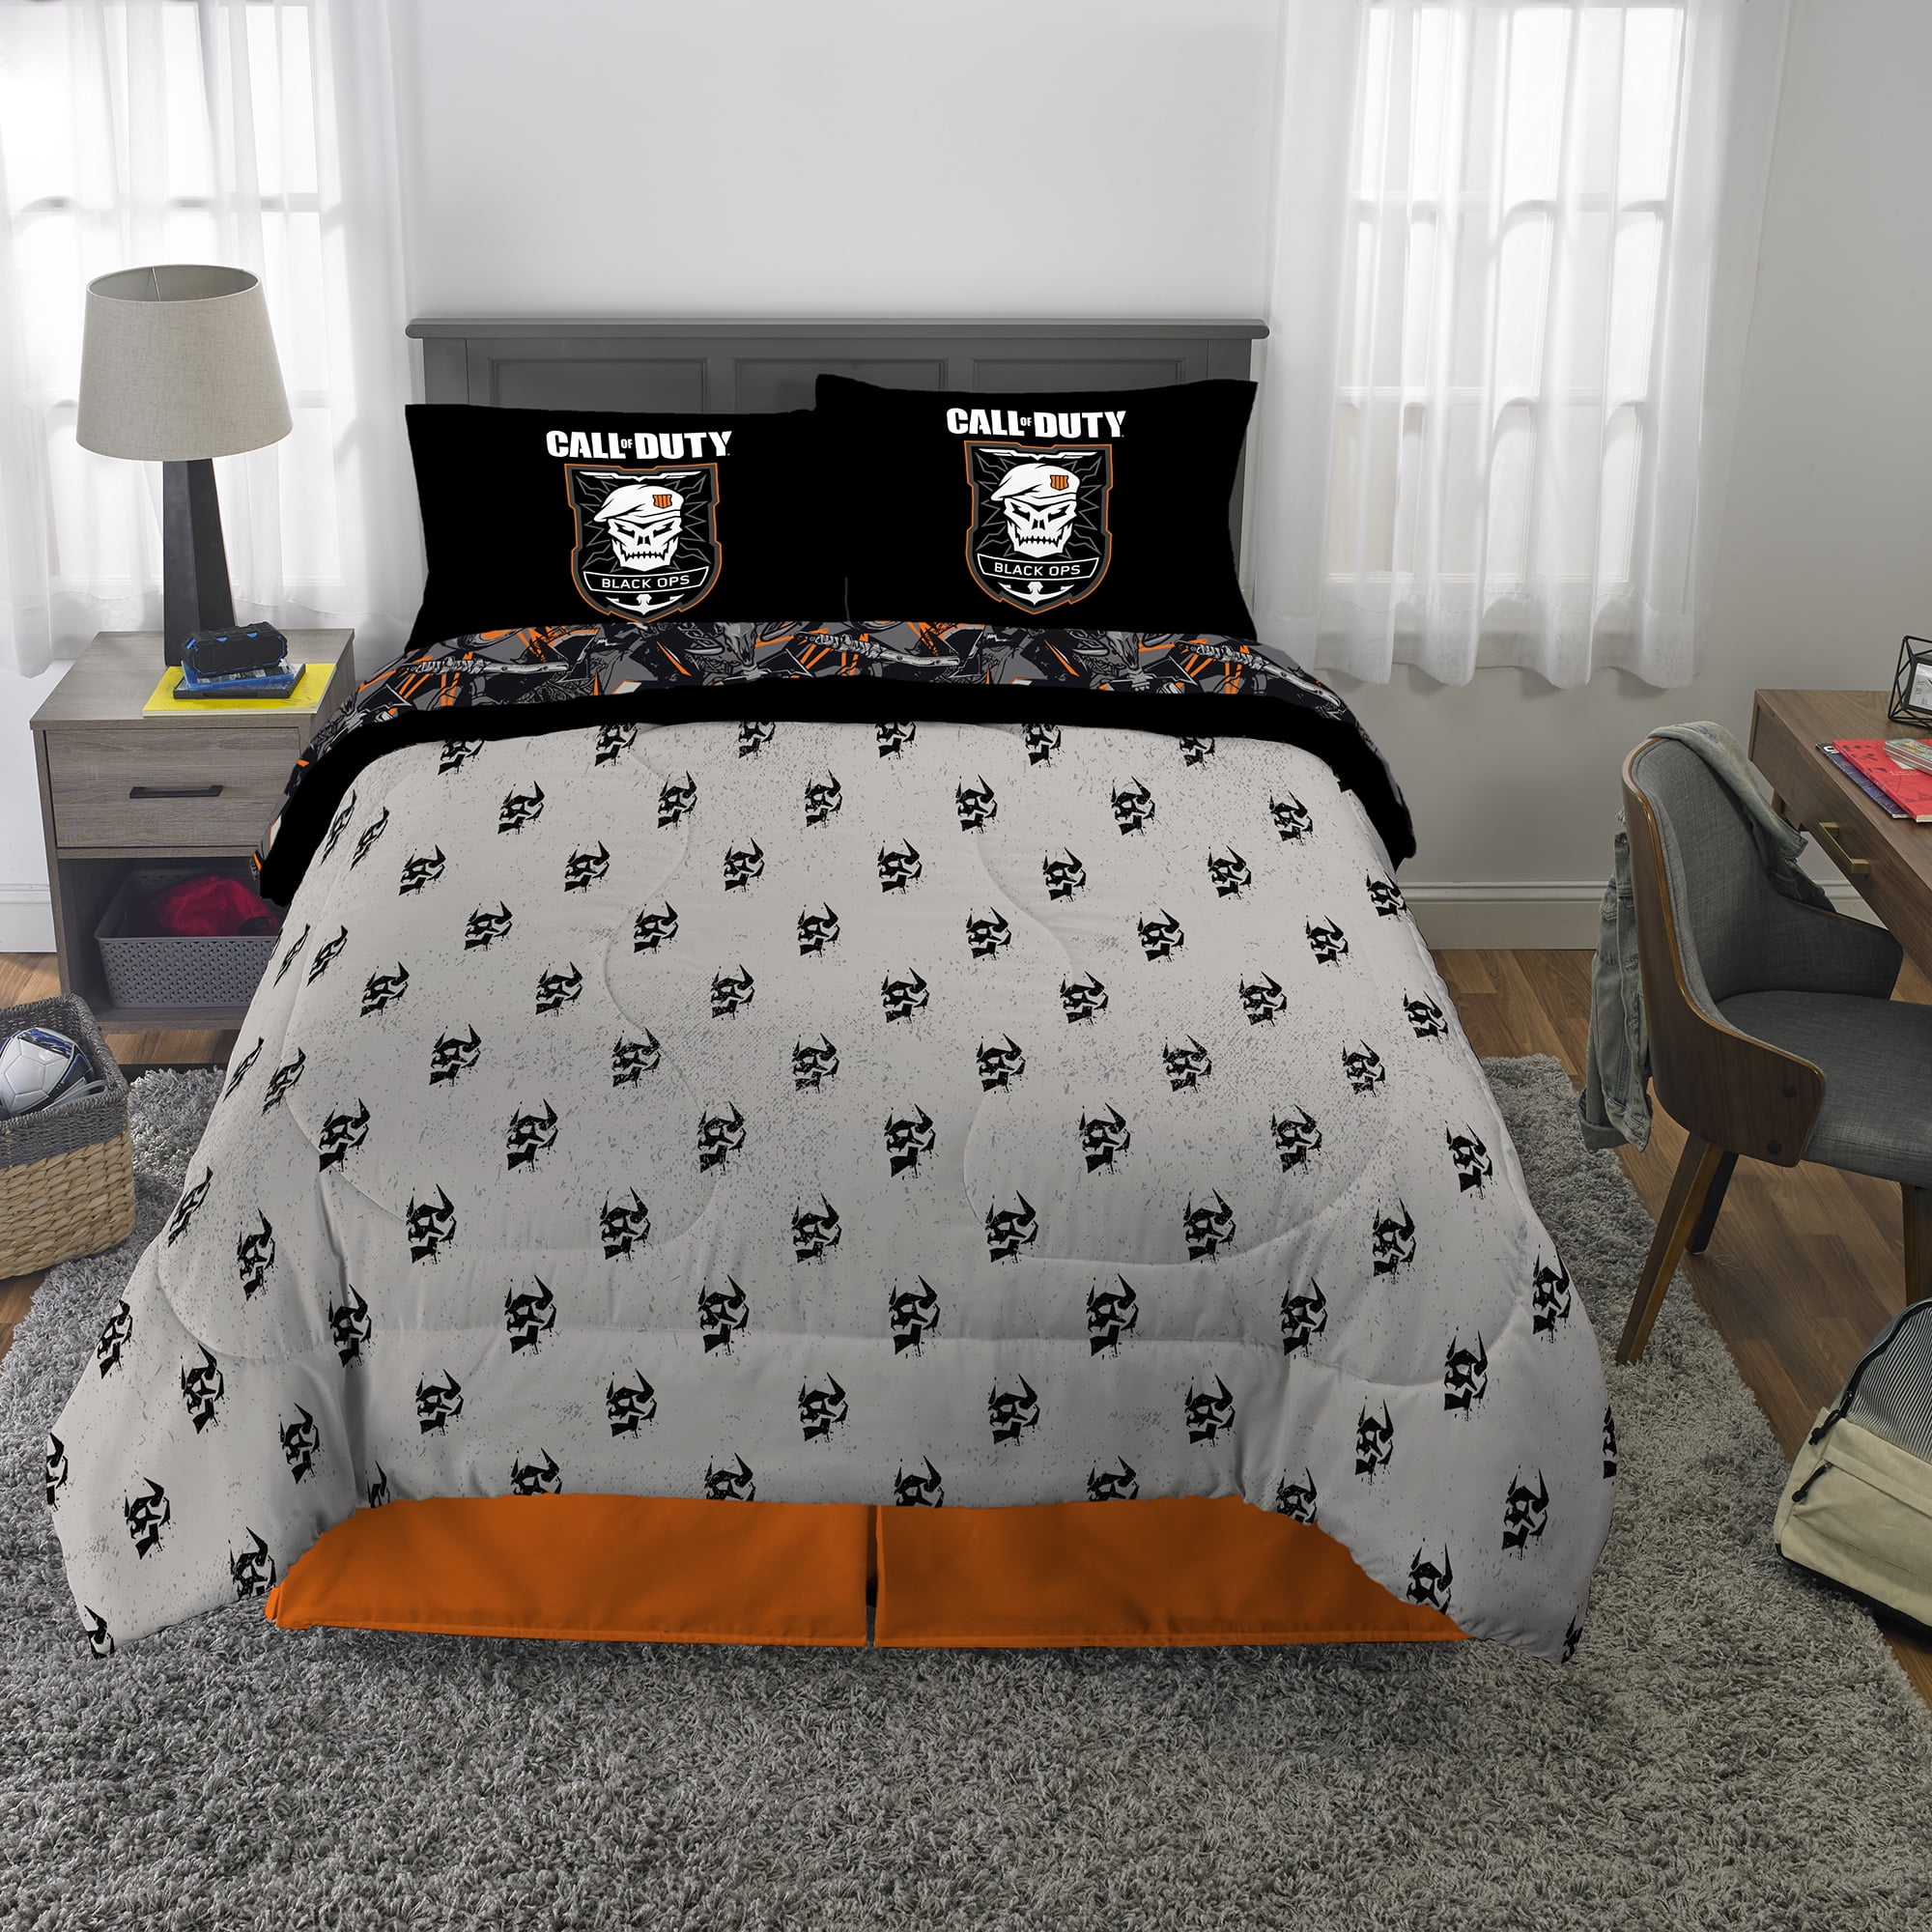 Bed In A Bag Bedding Set, Call Of Duty Twin Bedding